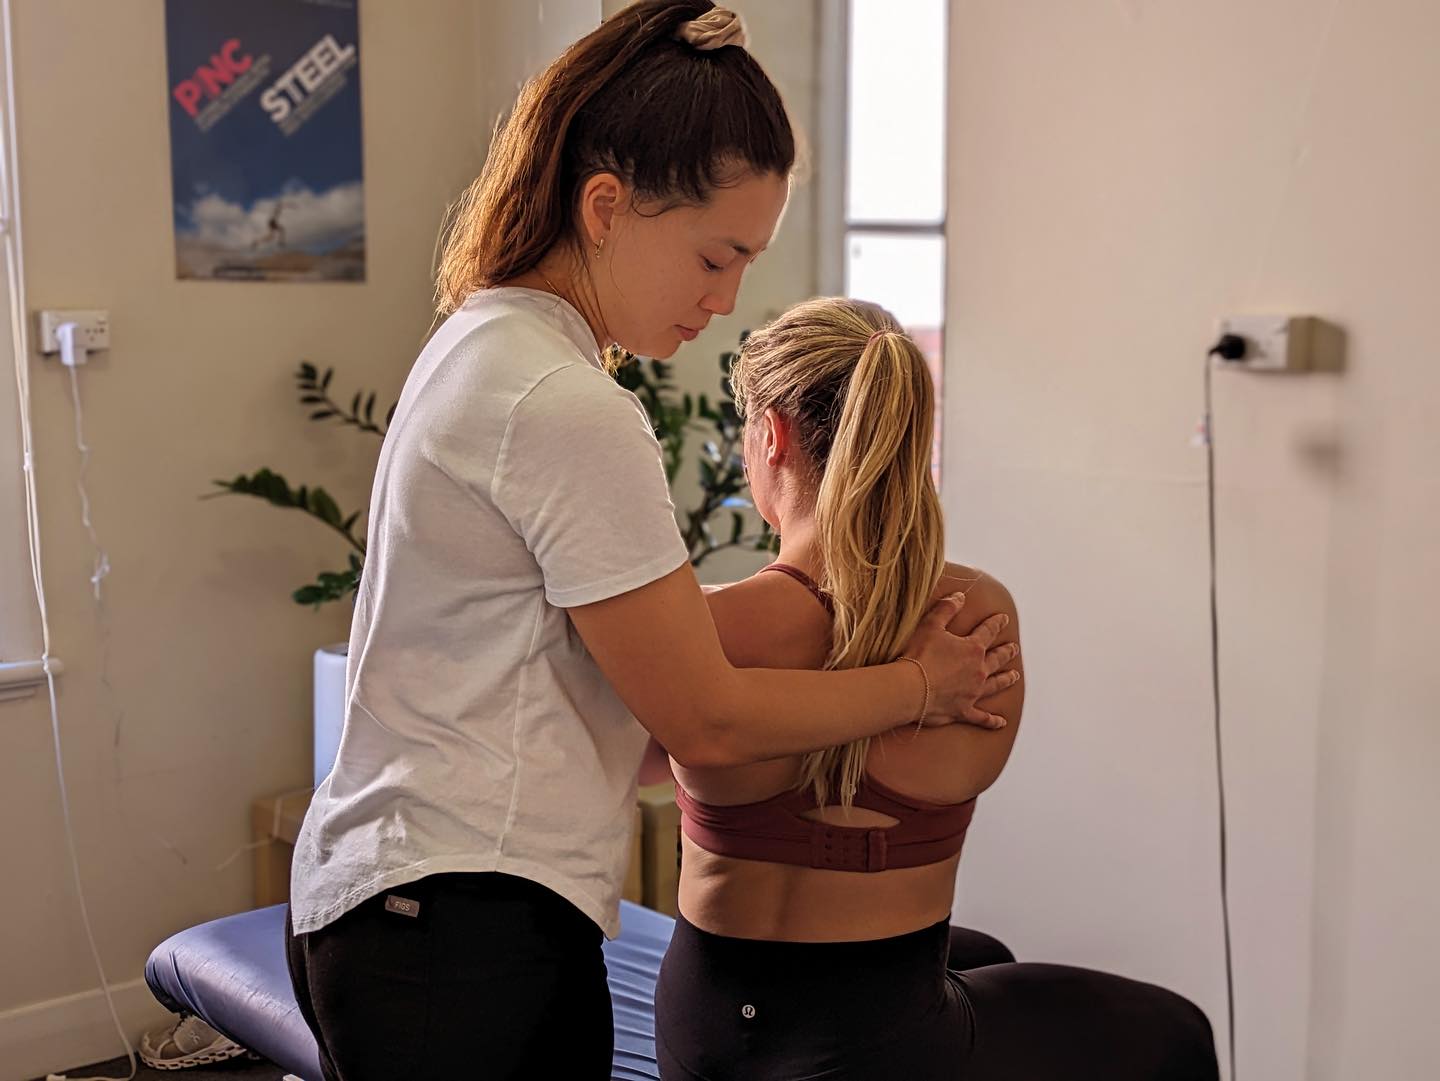 Mid back pain is a super common complaint if you spend a lot of time sitting, lifting or working!Come and see one of our physio’s for a comprehensive assessment, some hands on treatment and exercises to help manage your pain long-term